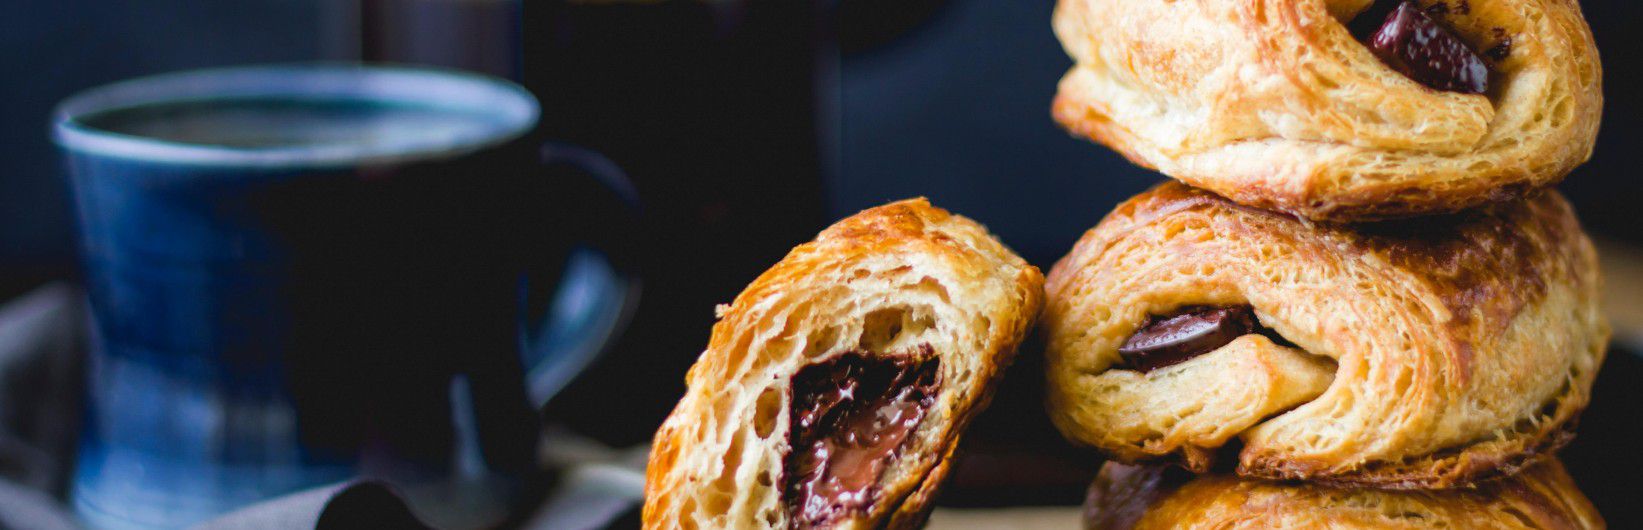 National Pastry Day: North America’s Favorite Pastries